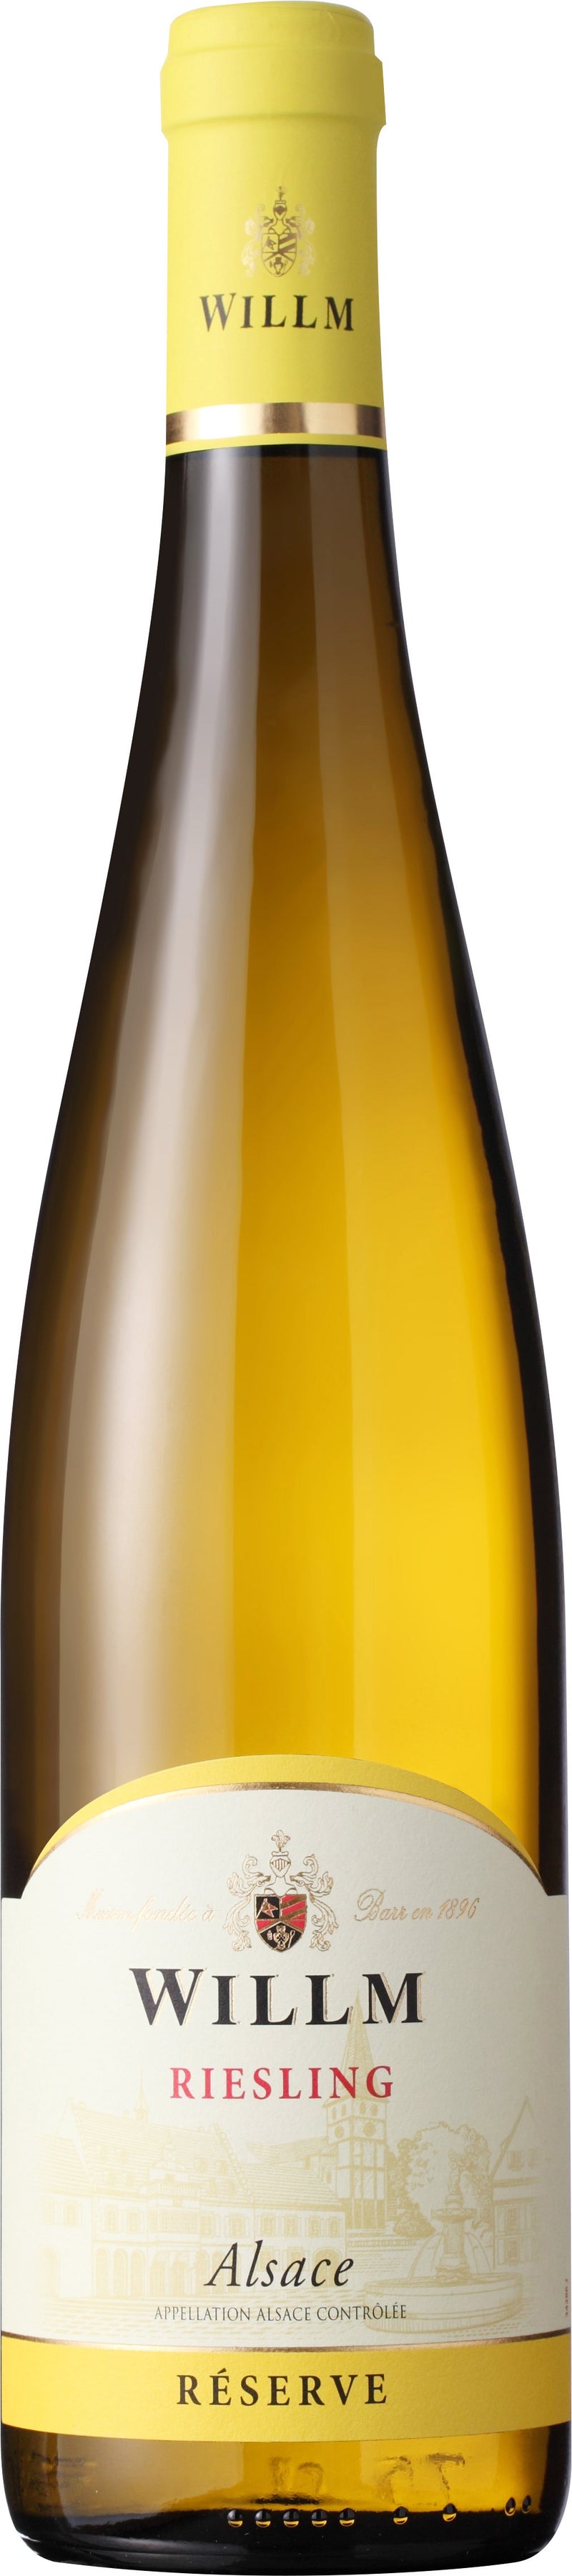 Willm - Riesling Reserve - Alsace 75cl